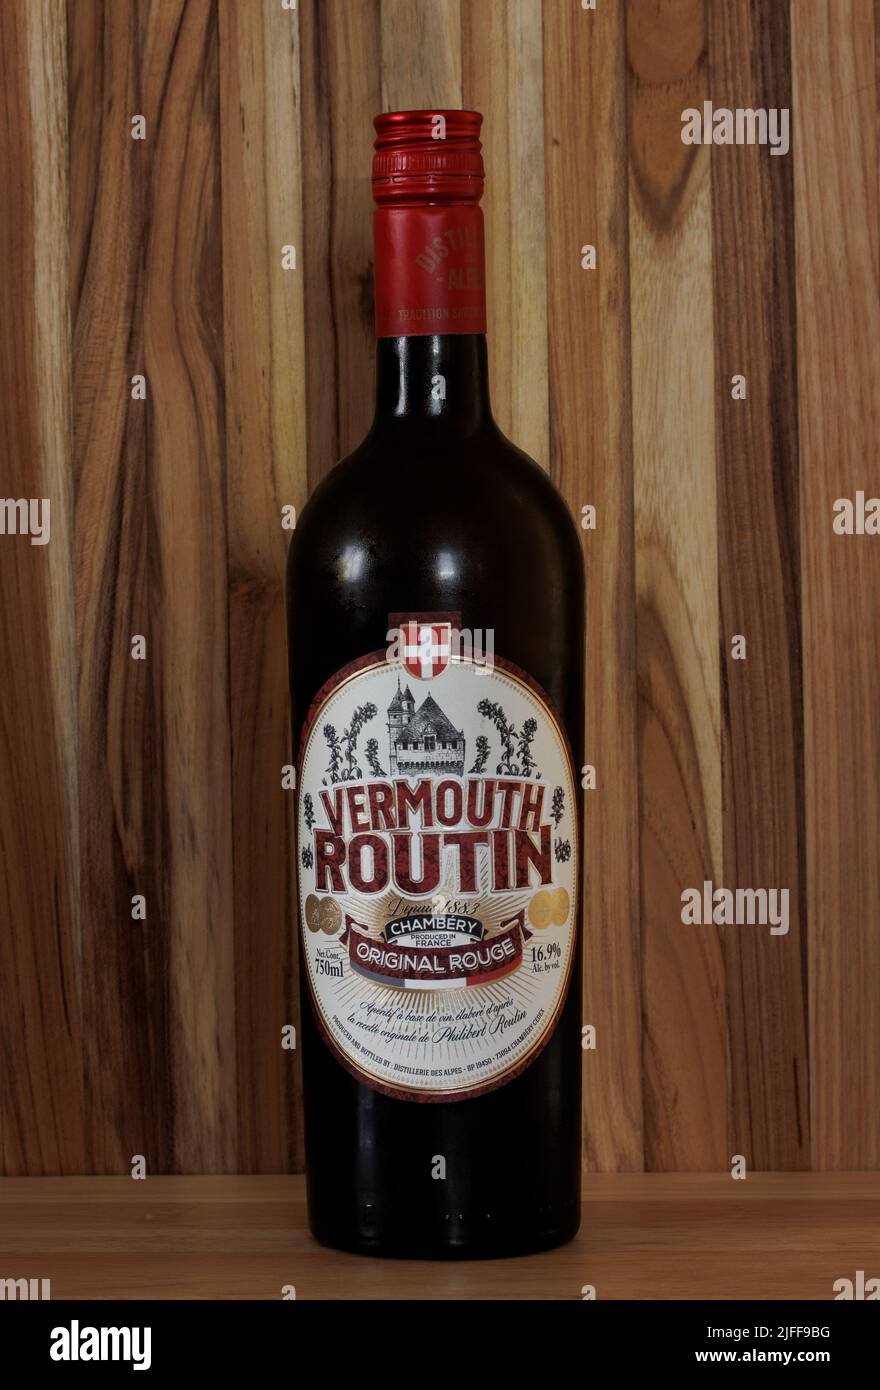 bottle of Vermouth Routin, original rouge from Chambery, France, a dry, herbal aperitif Stock Photo